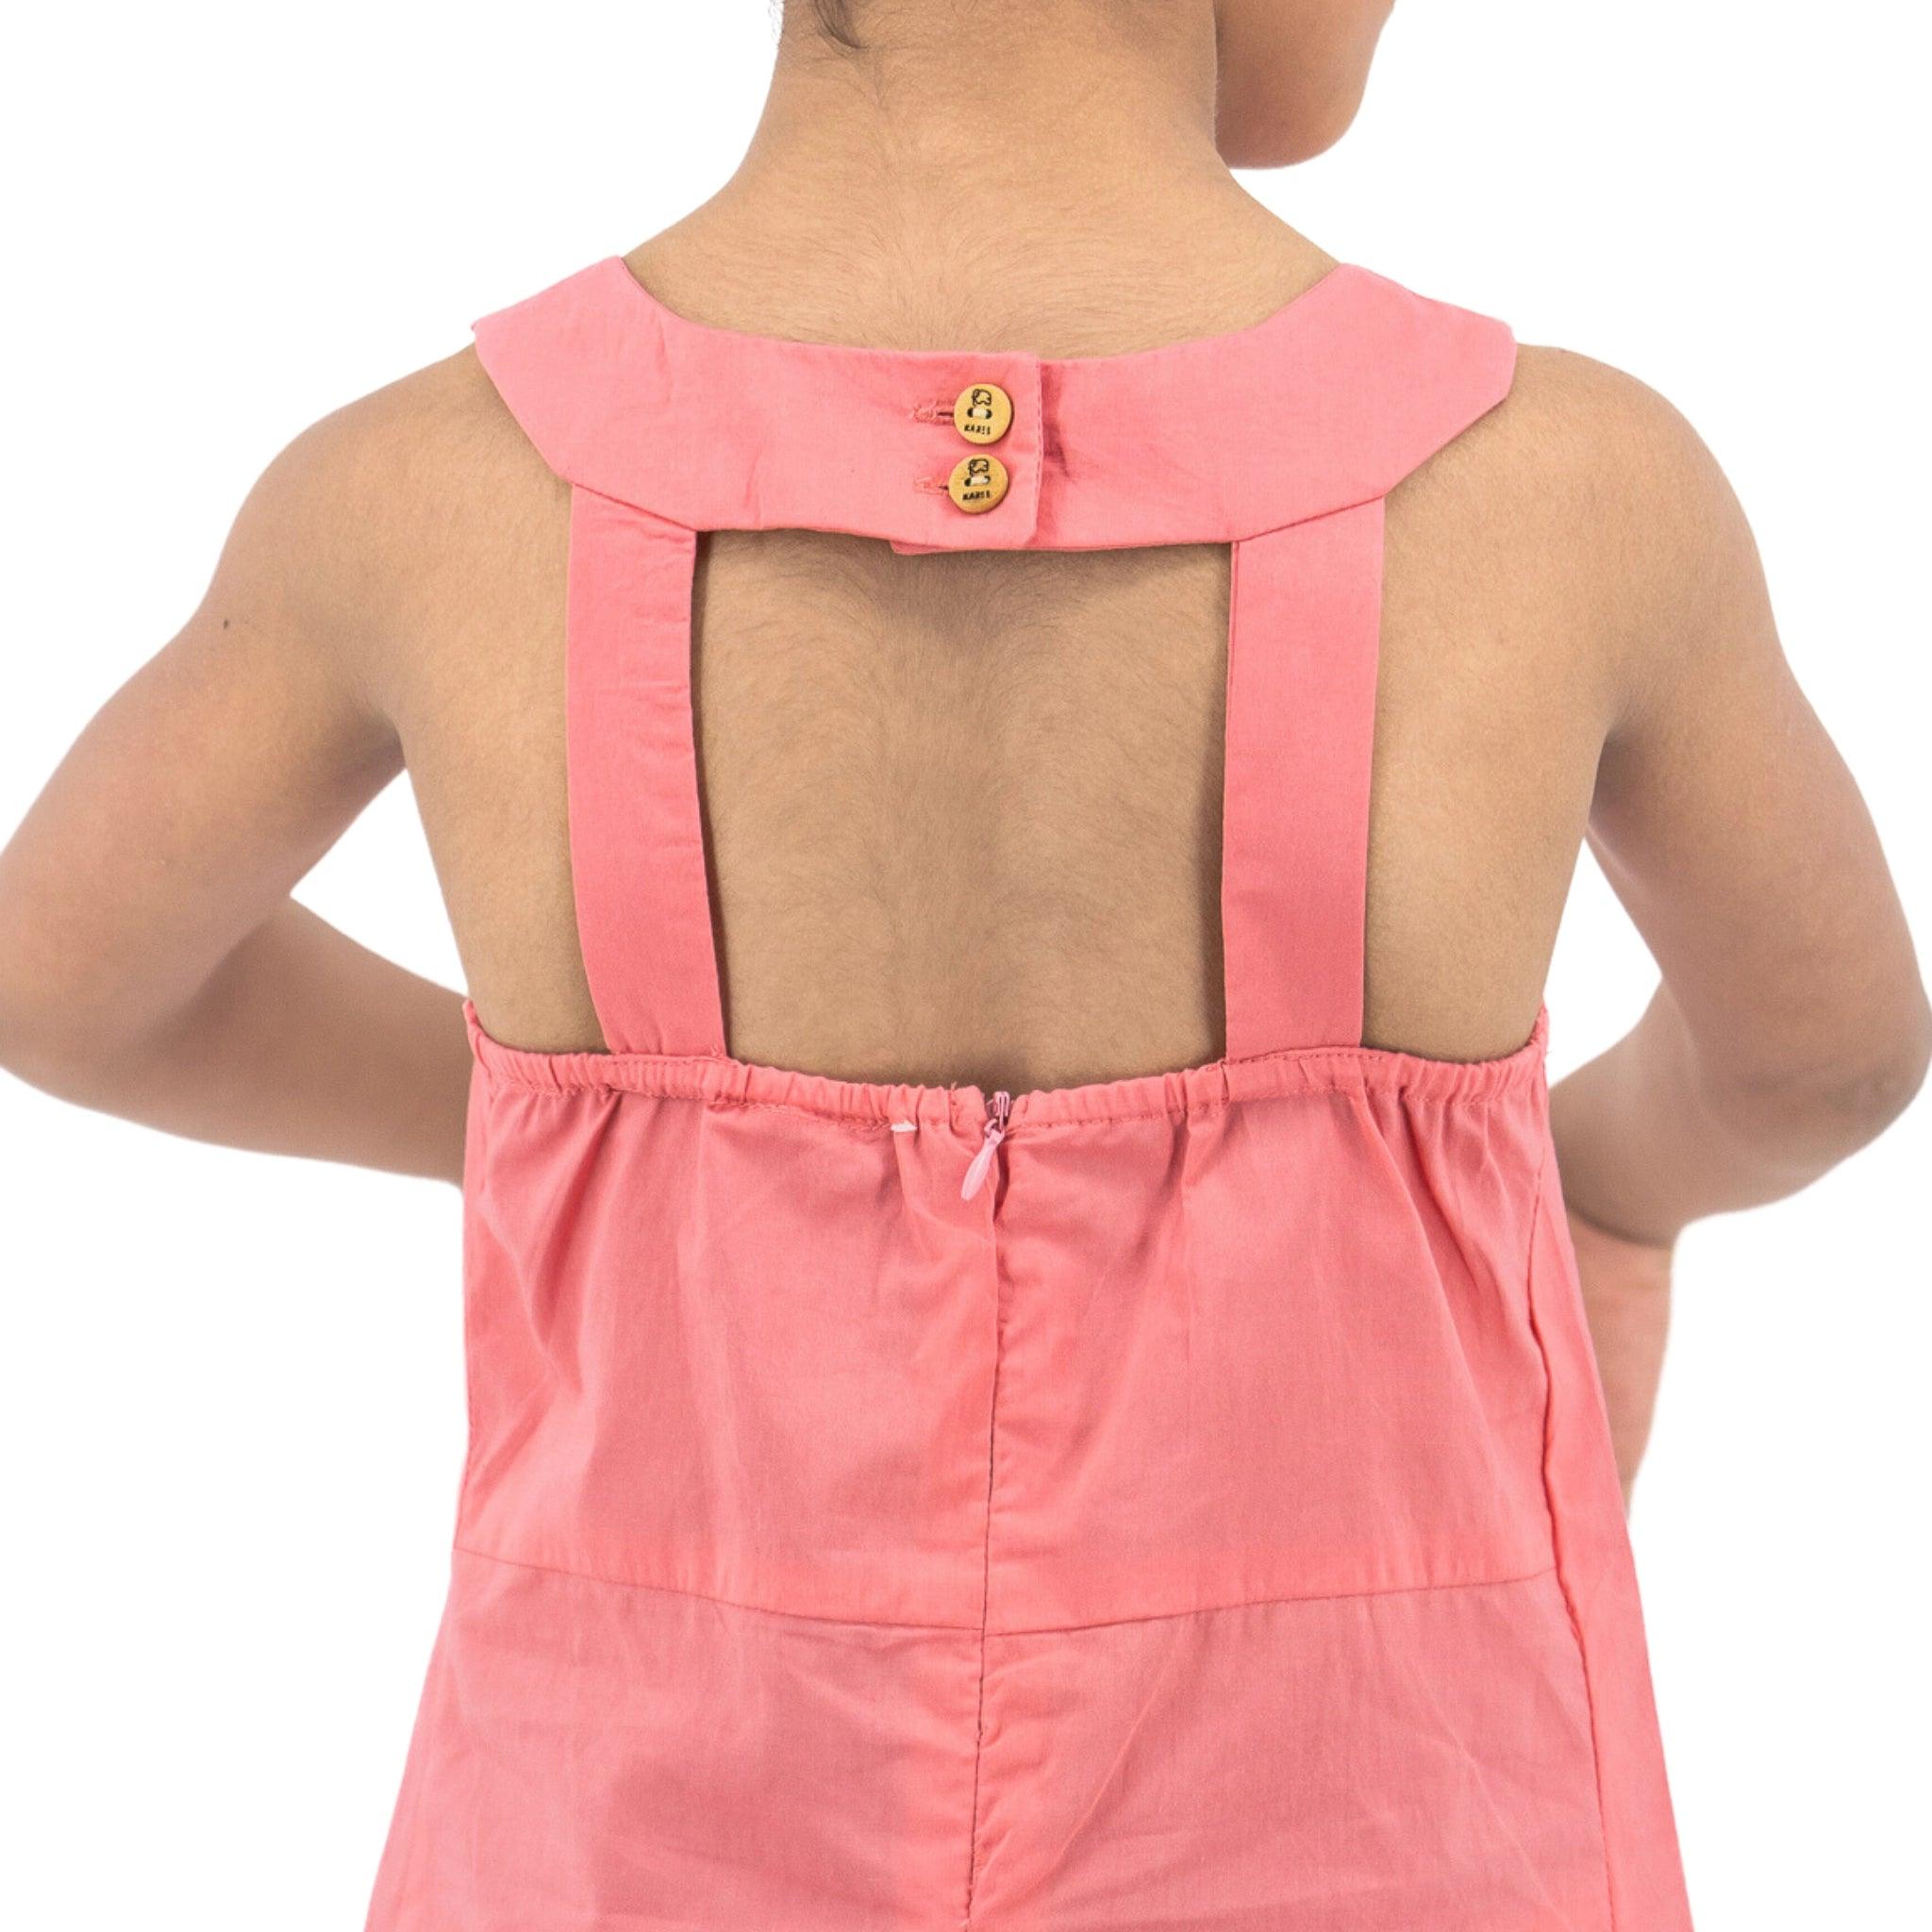 Rear view of a person wearing a Karee Tea Rose Cotton Bib Neck Top for kids with a collar button detail and a back zipper.